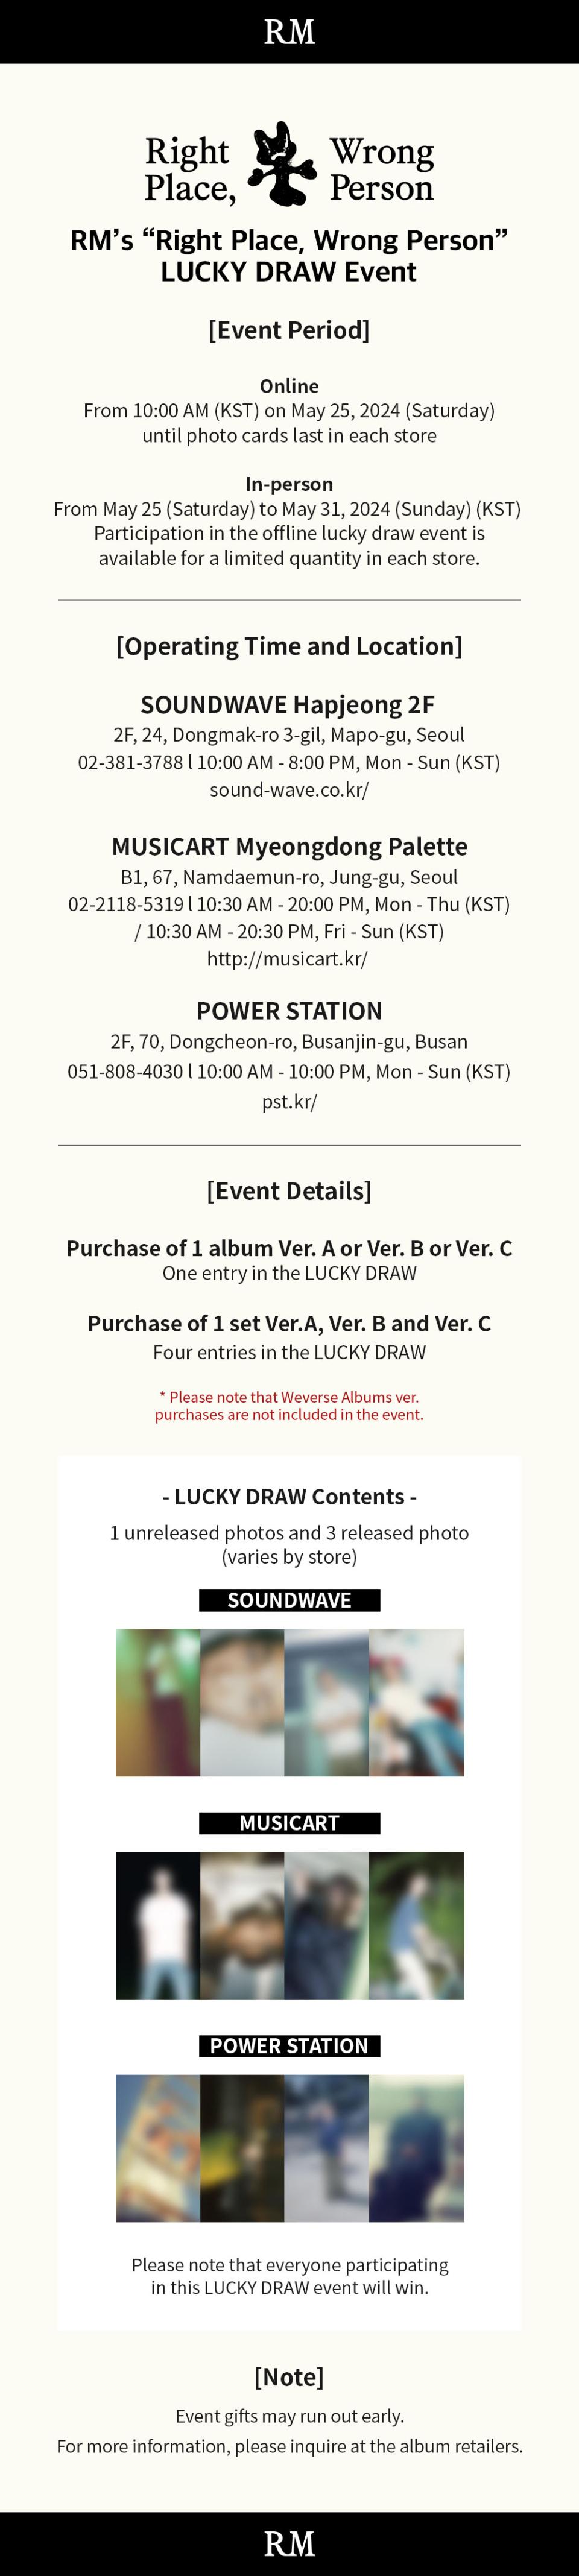 RM of BTS RPWP Lucky Draw Photocards